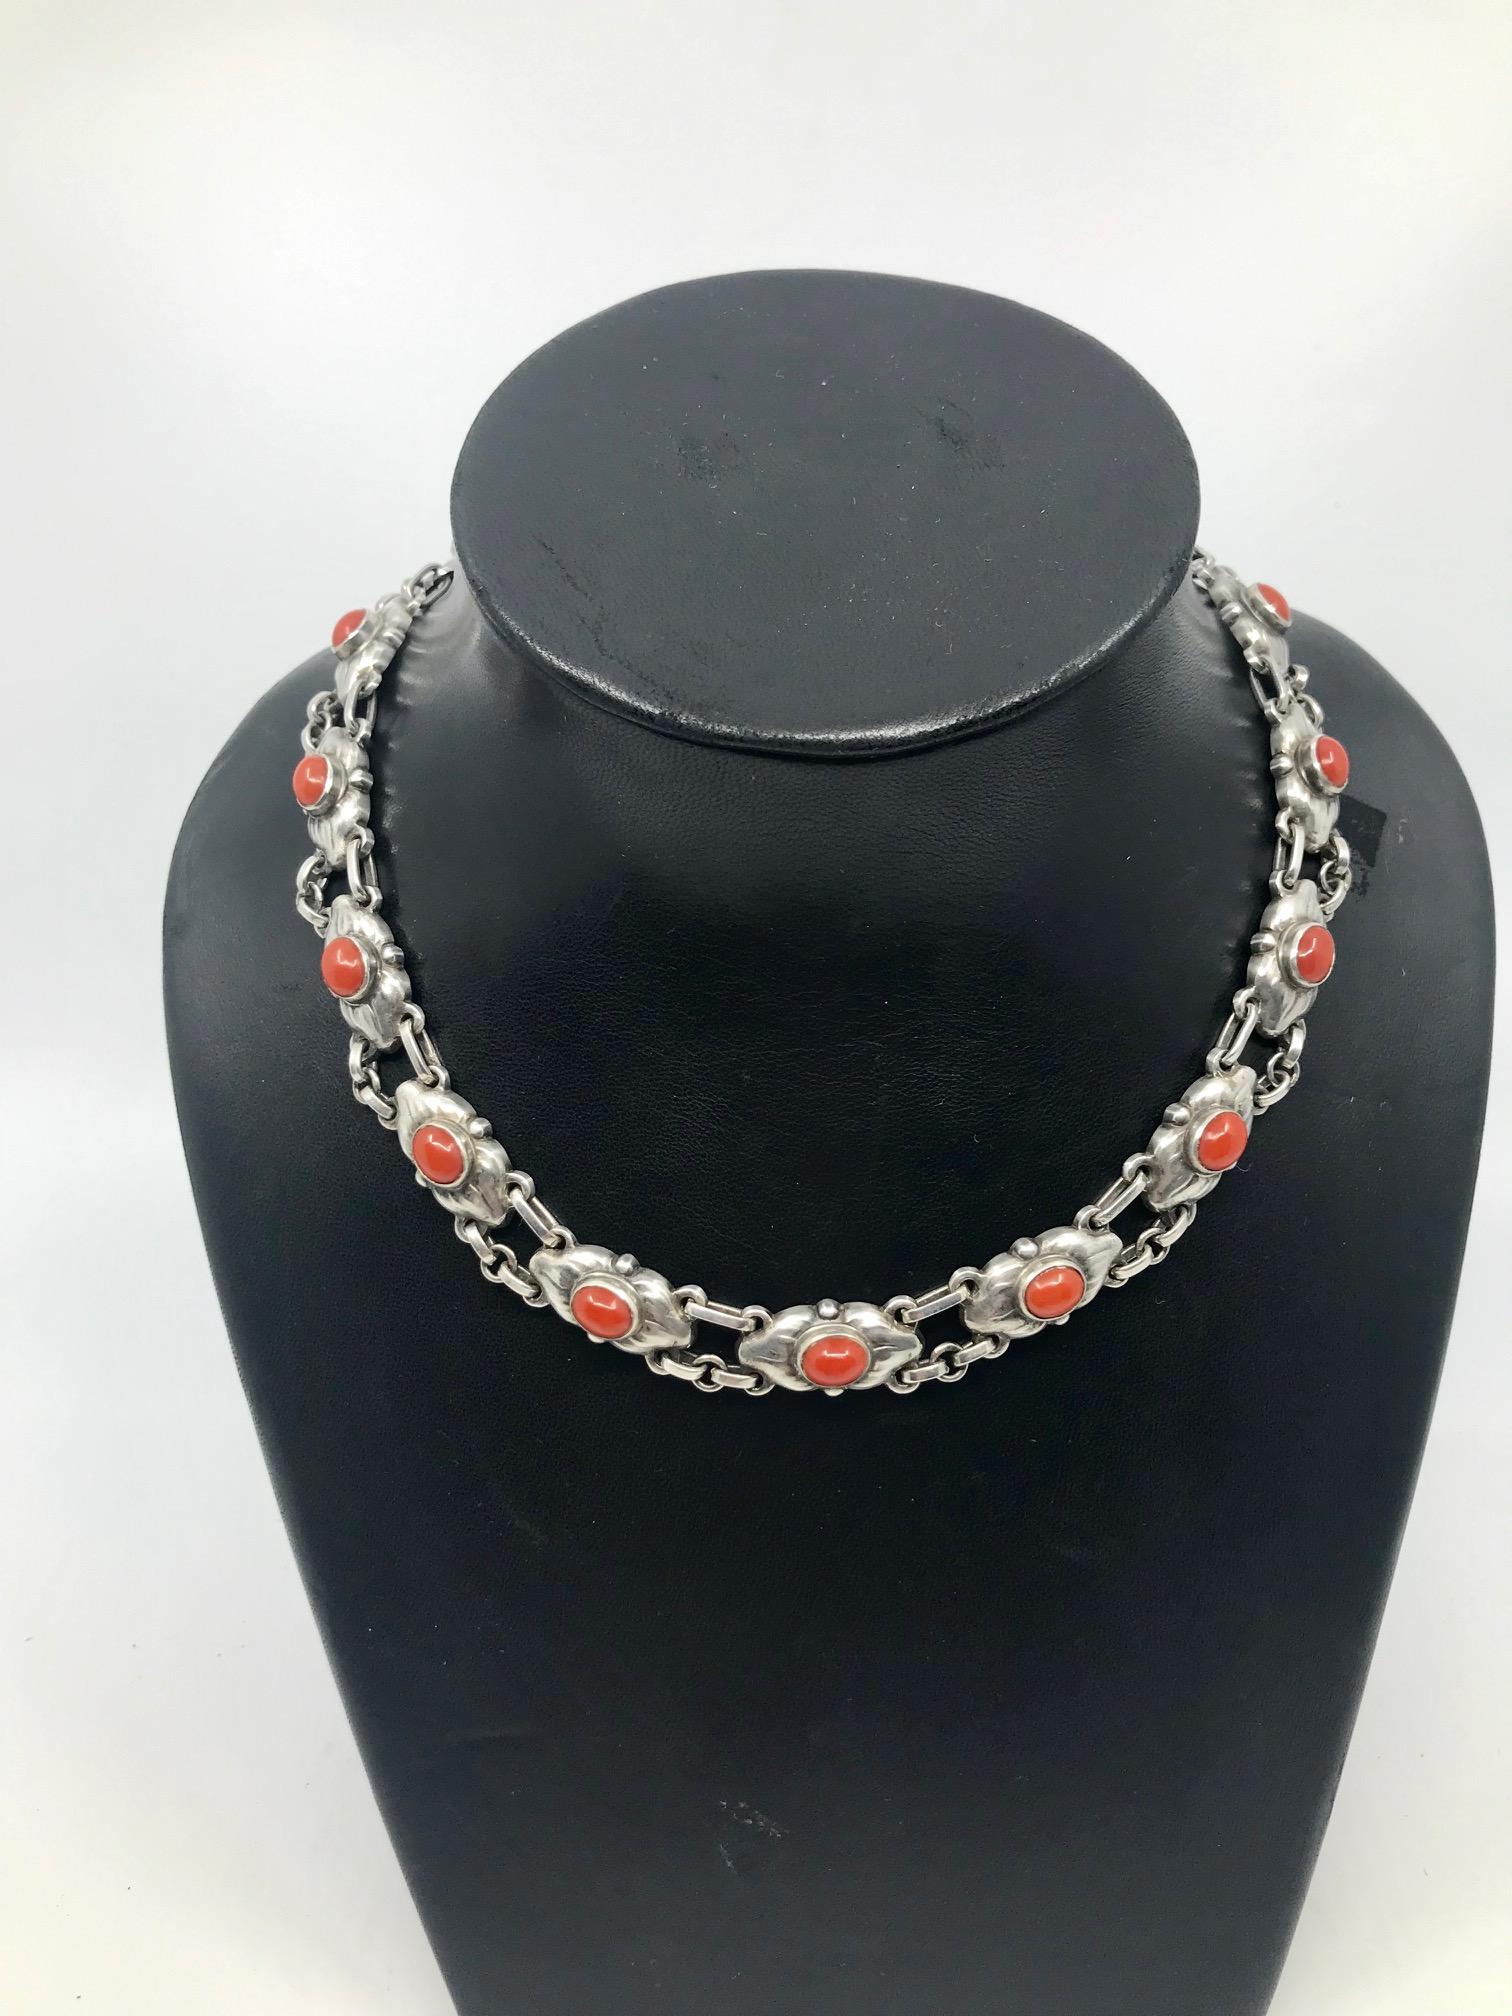 Georg Jensen silver necklace with 15 cabochon set coral stonesand a single large silver bead on the lock, design #22 by Georg Jensen.
Measures 17